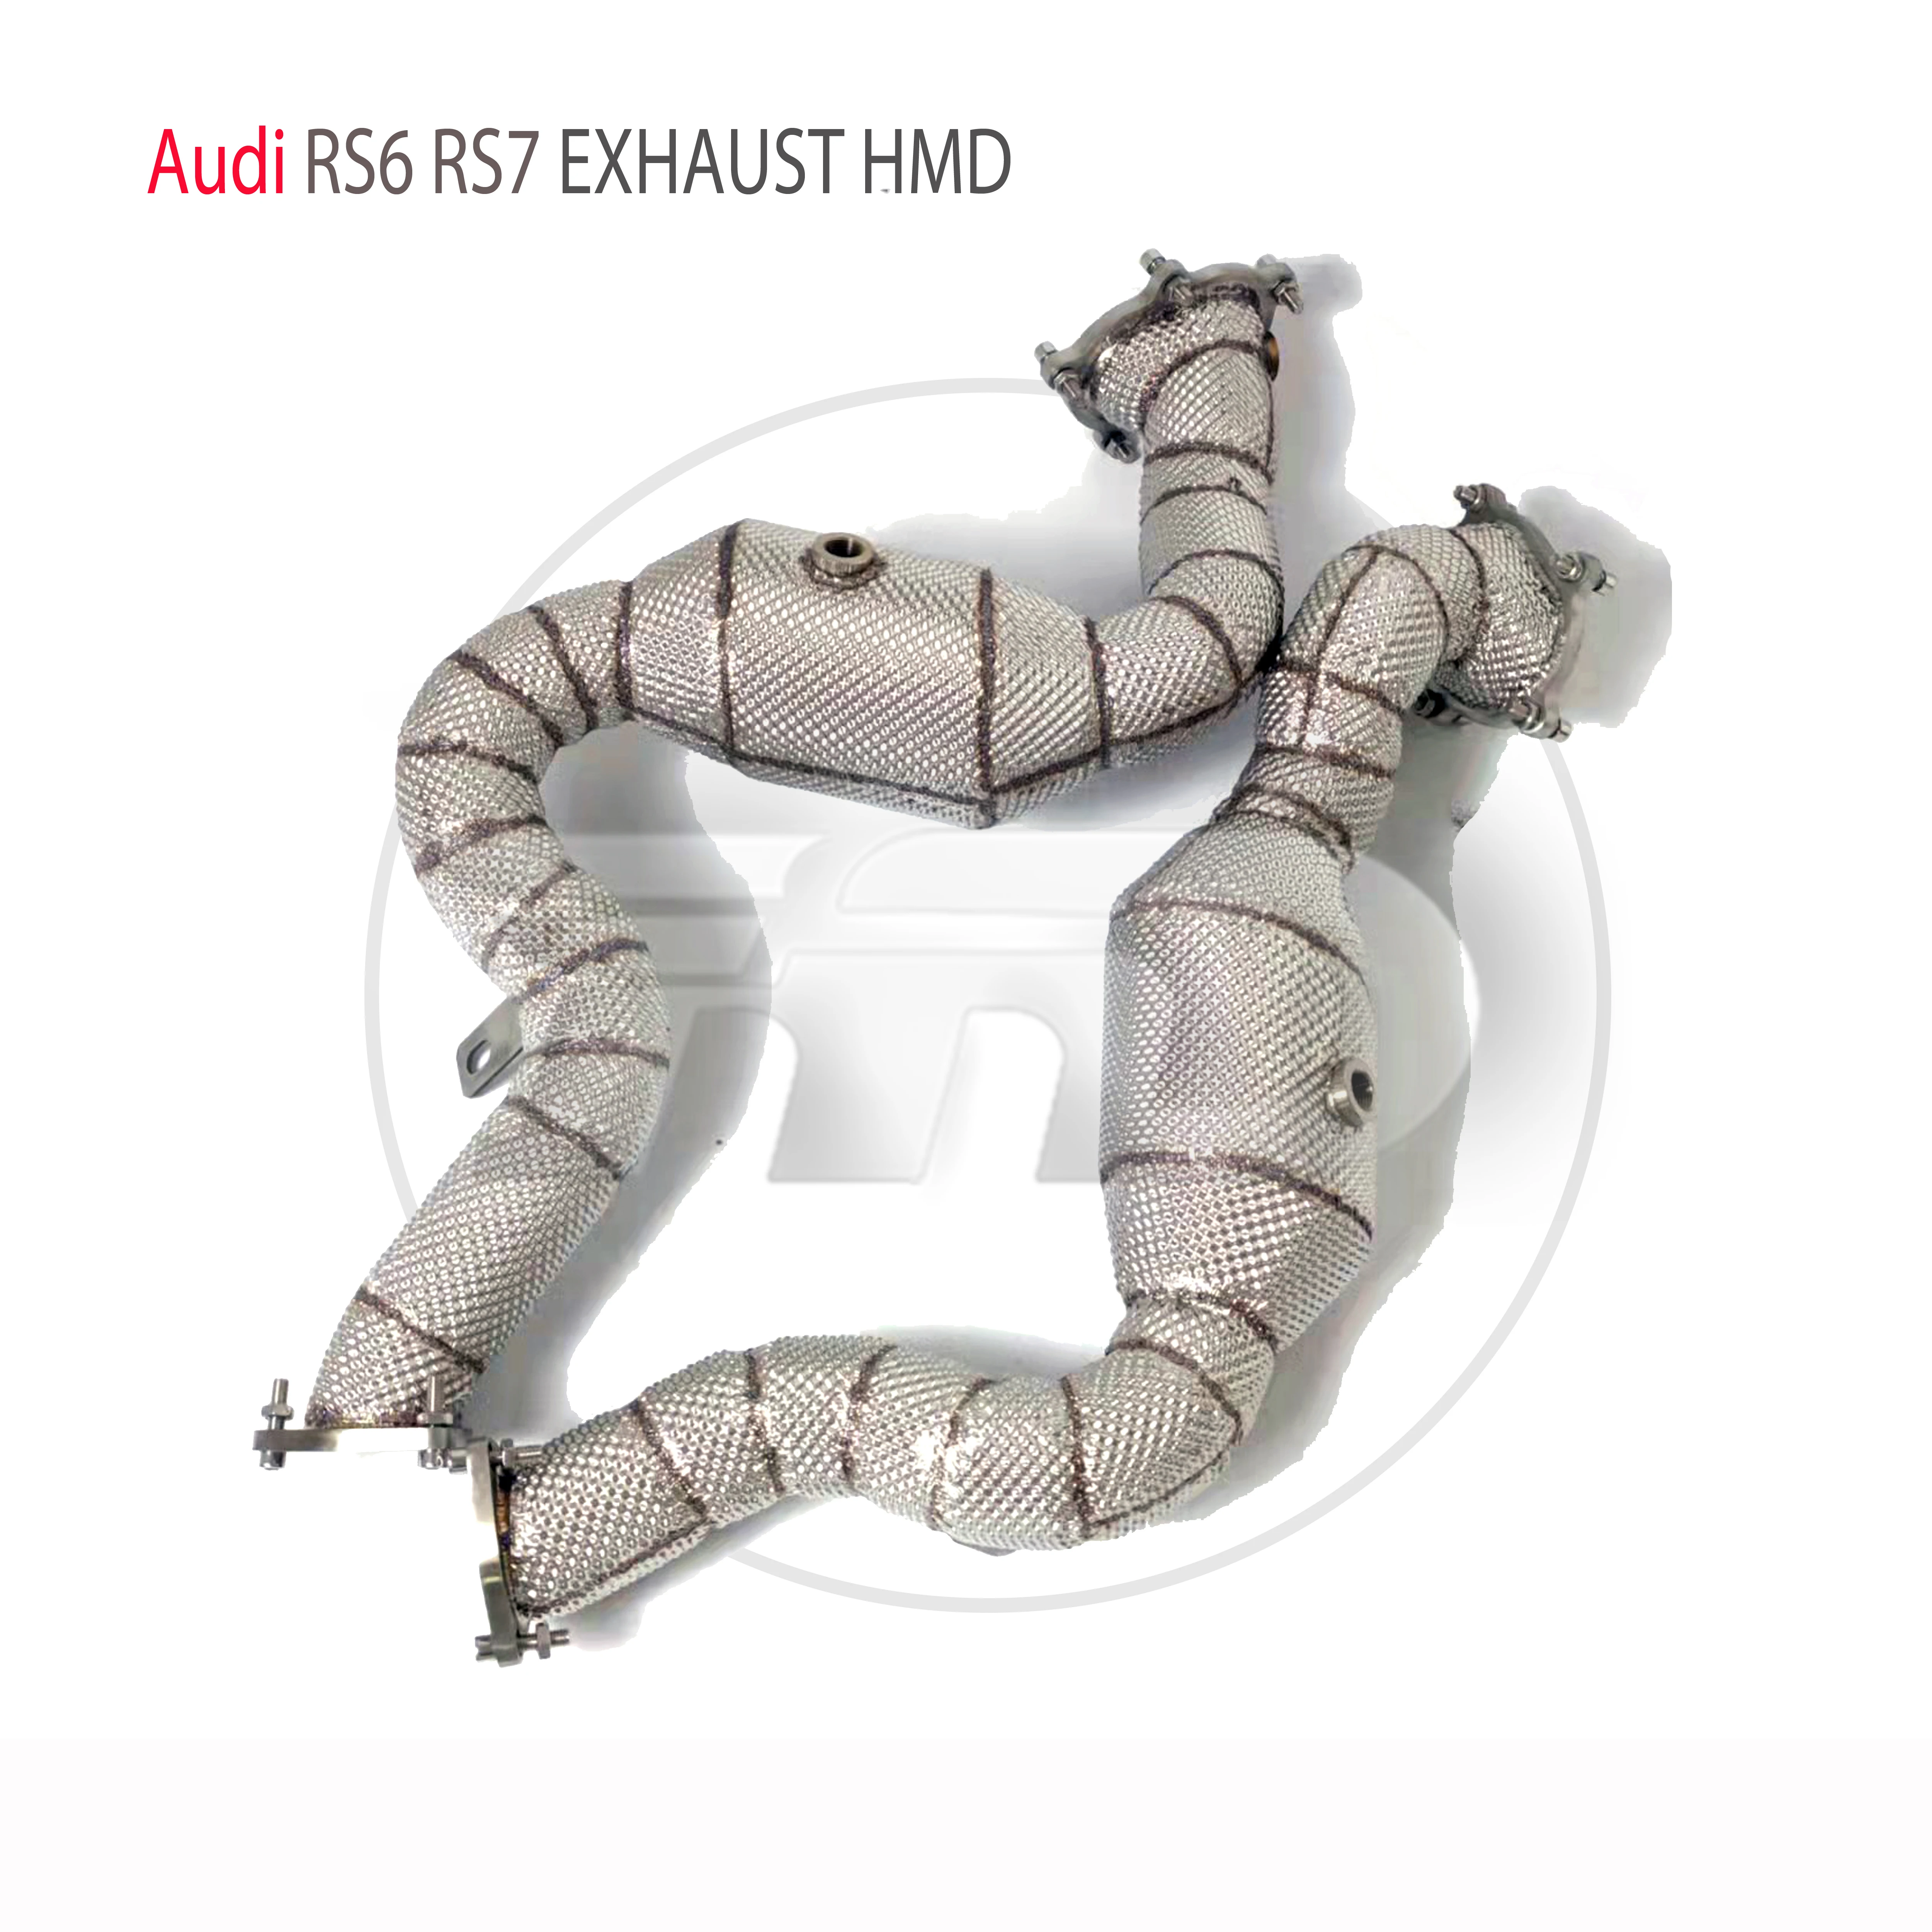 

HMD Exhaust Manifold High Flow Downpipe for Audi RS6 RS7 4.0T Car Accessories With Catalytic Header Without Cat Catless Pipe